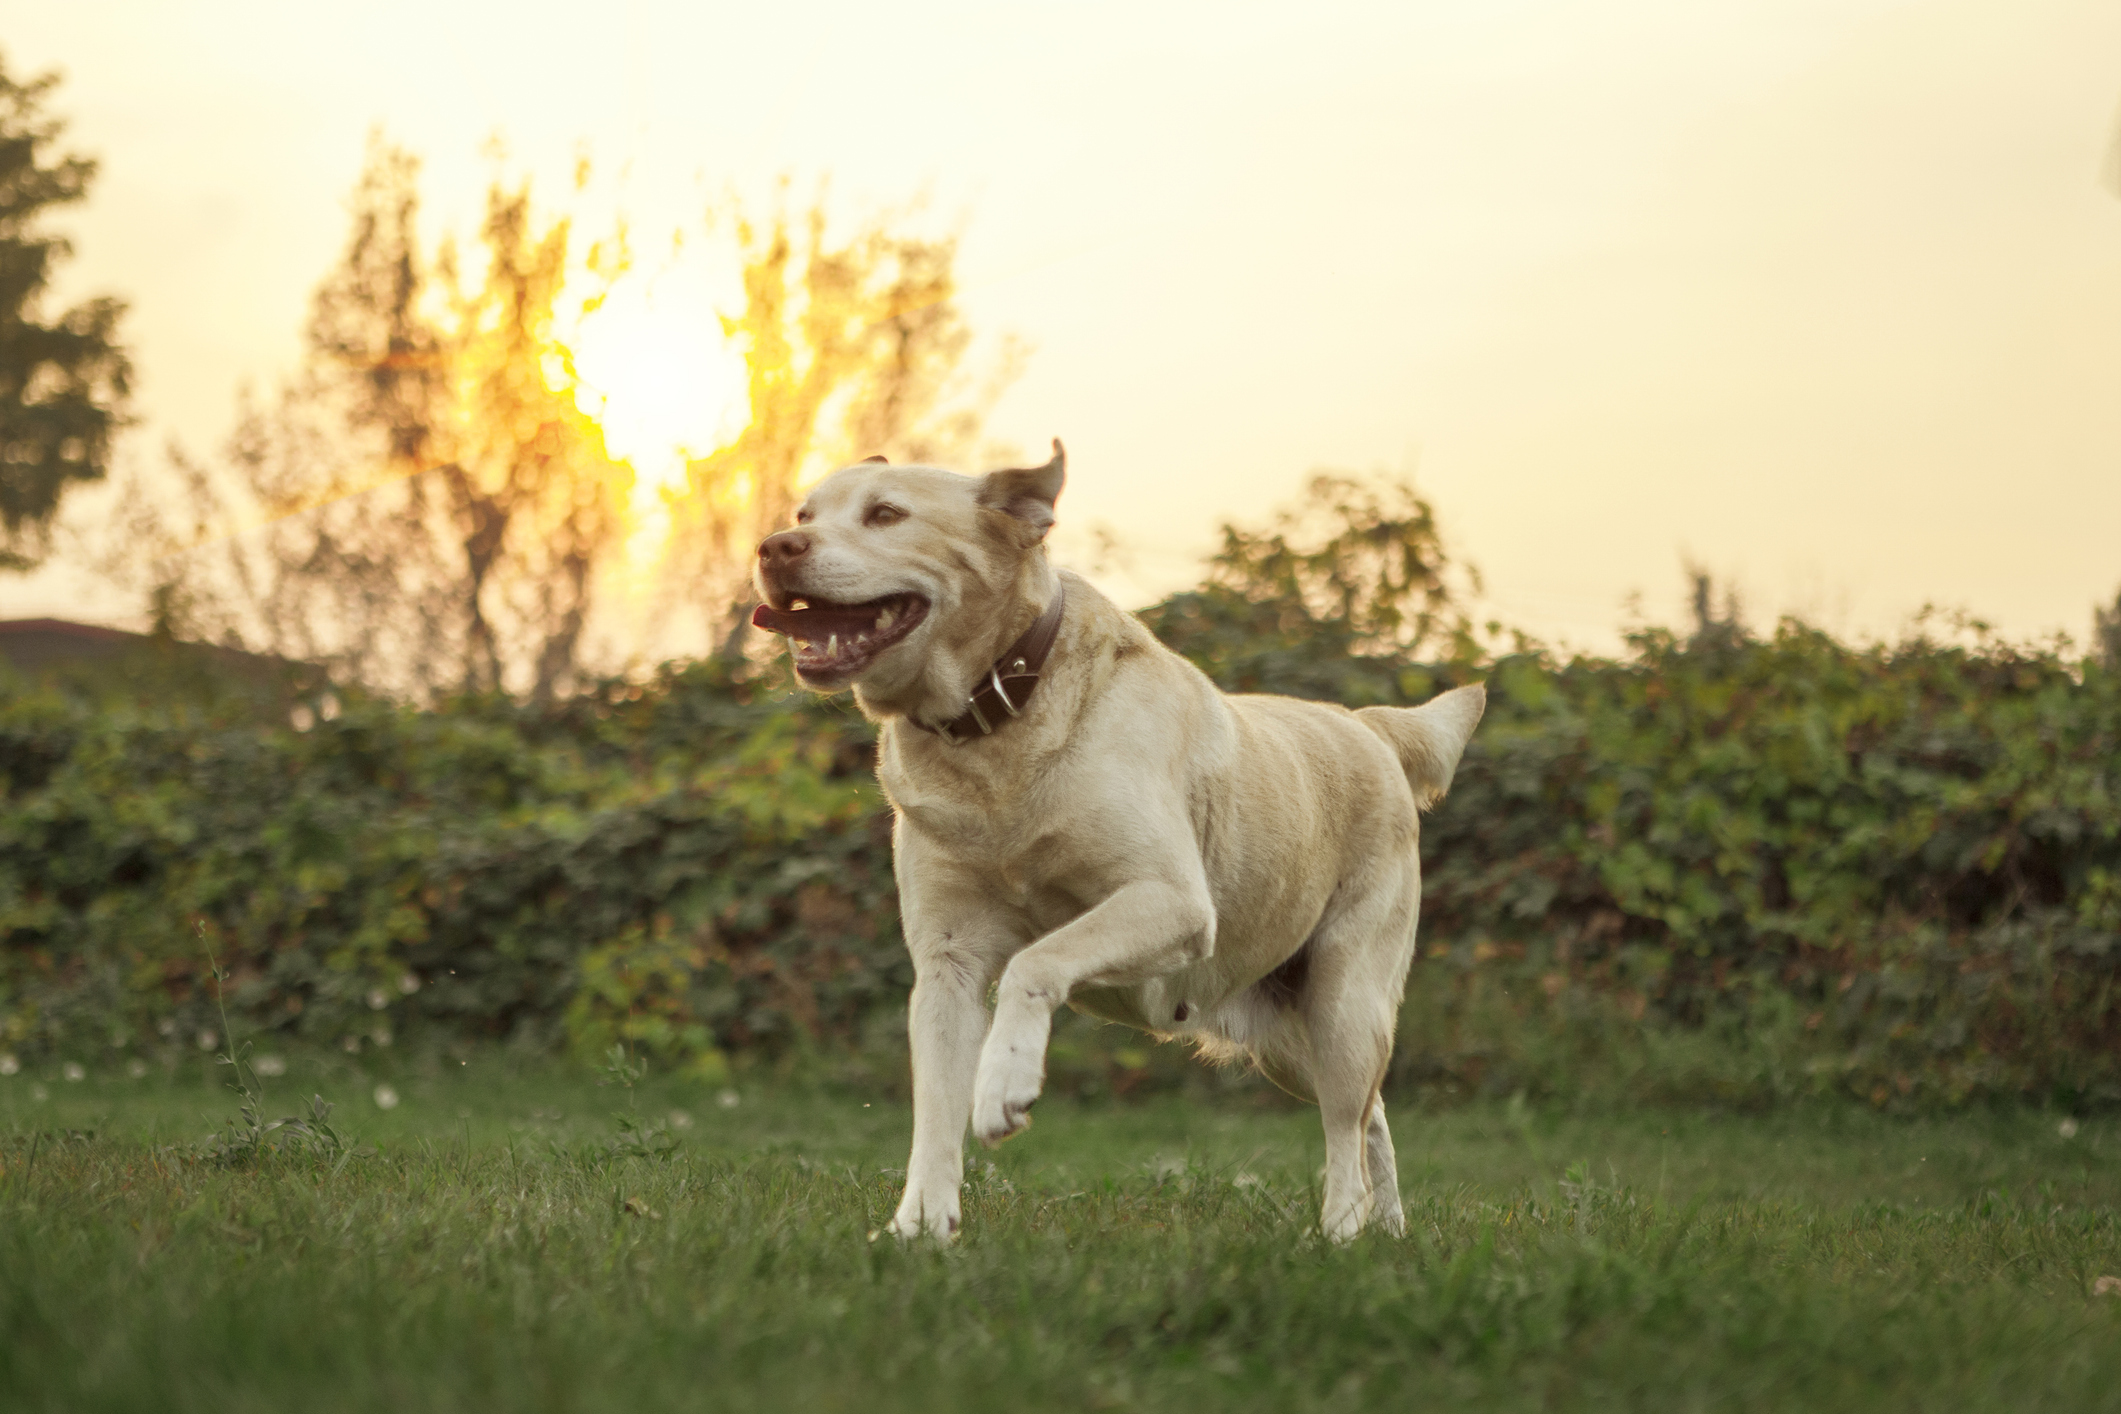 an arthritis drug helps old dogs, but some owners worry about side effects